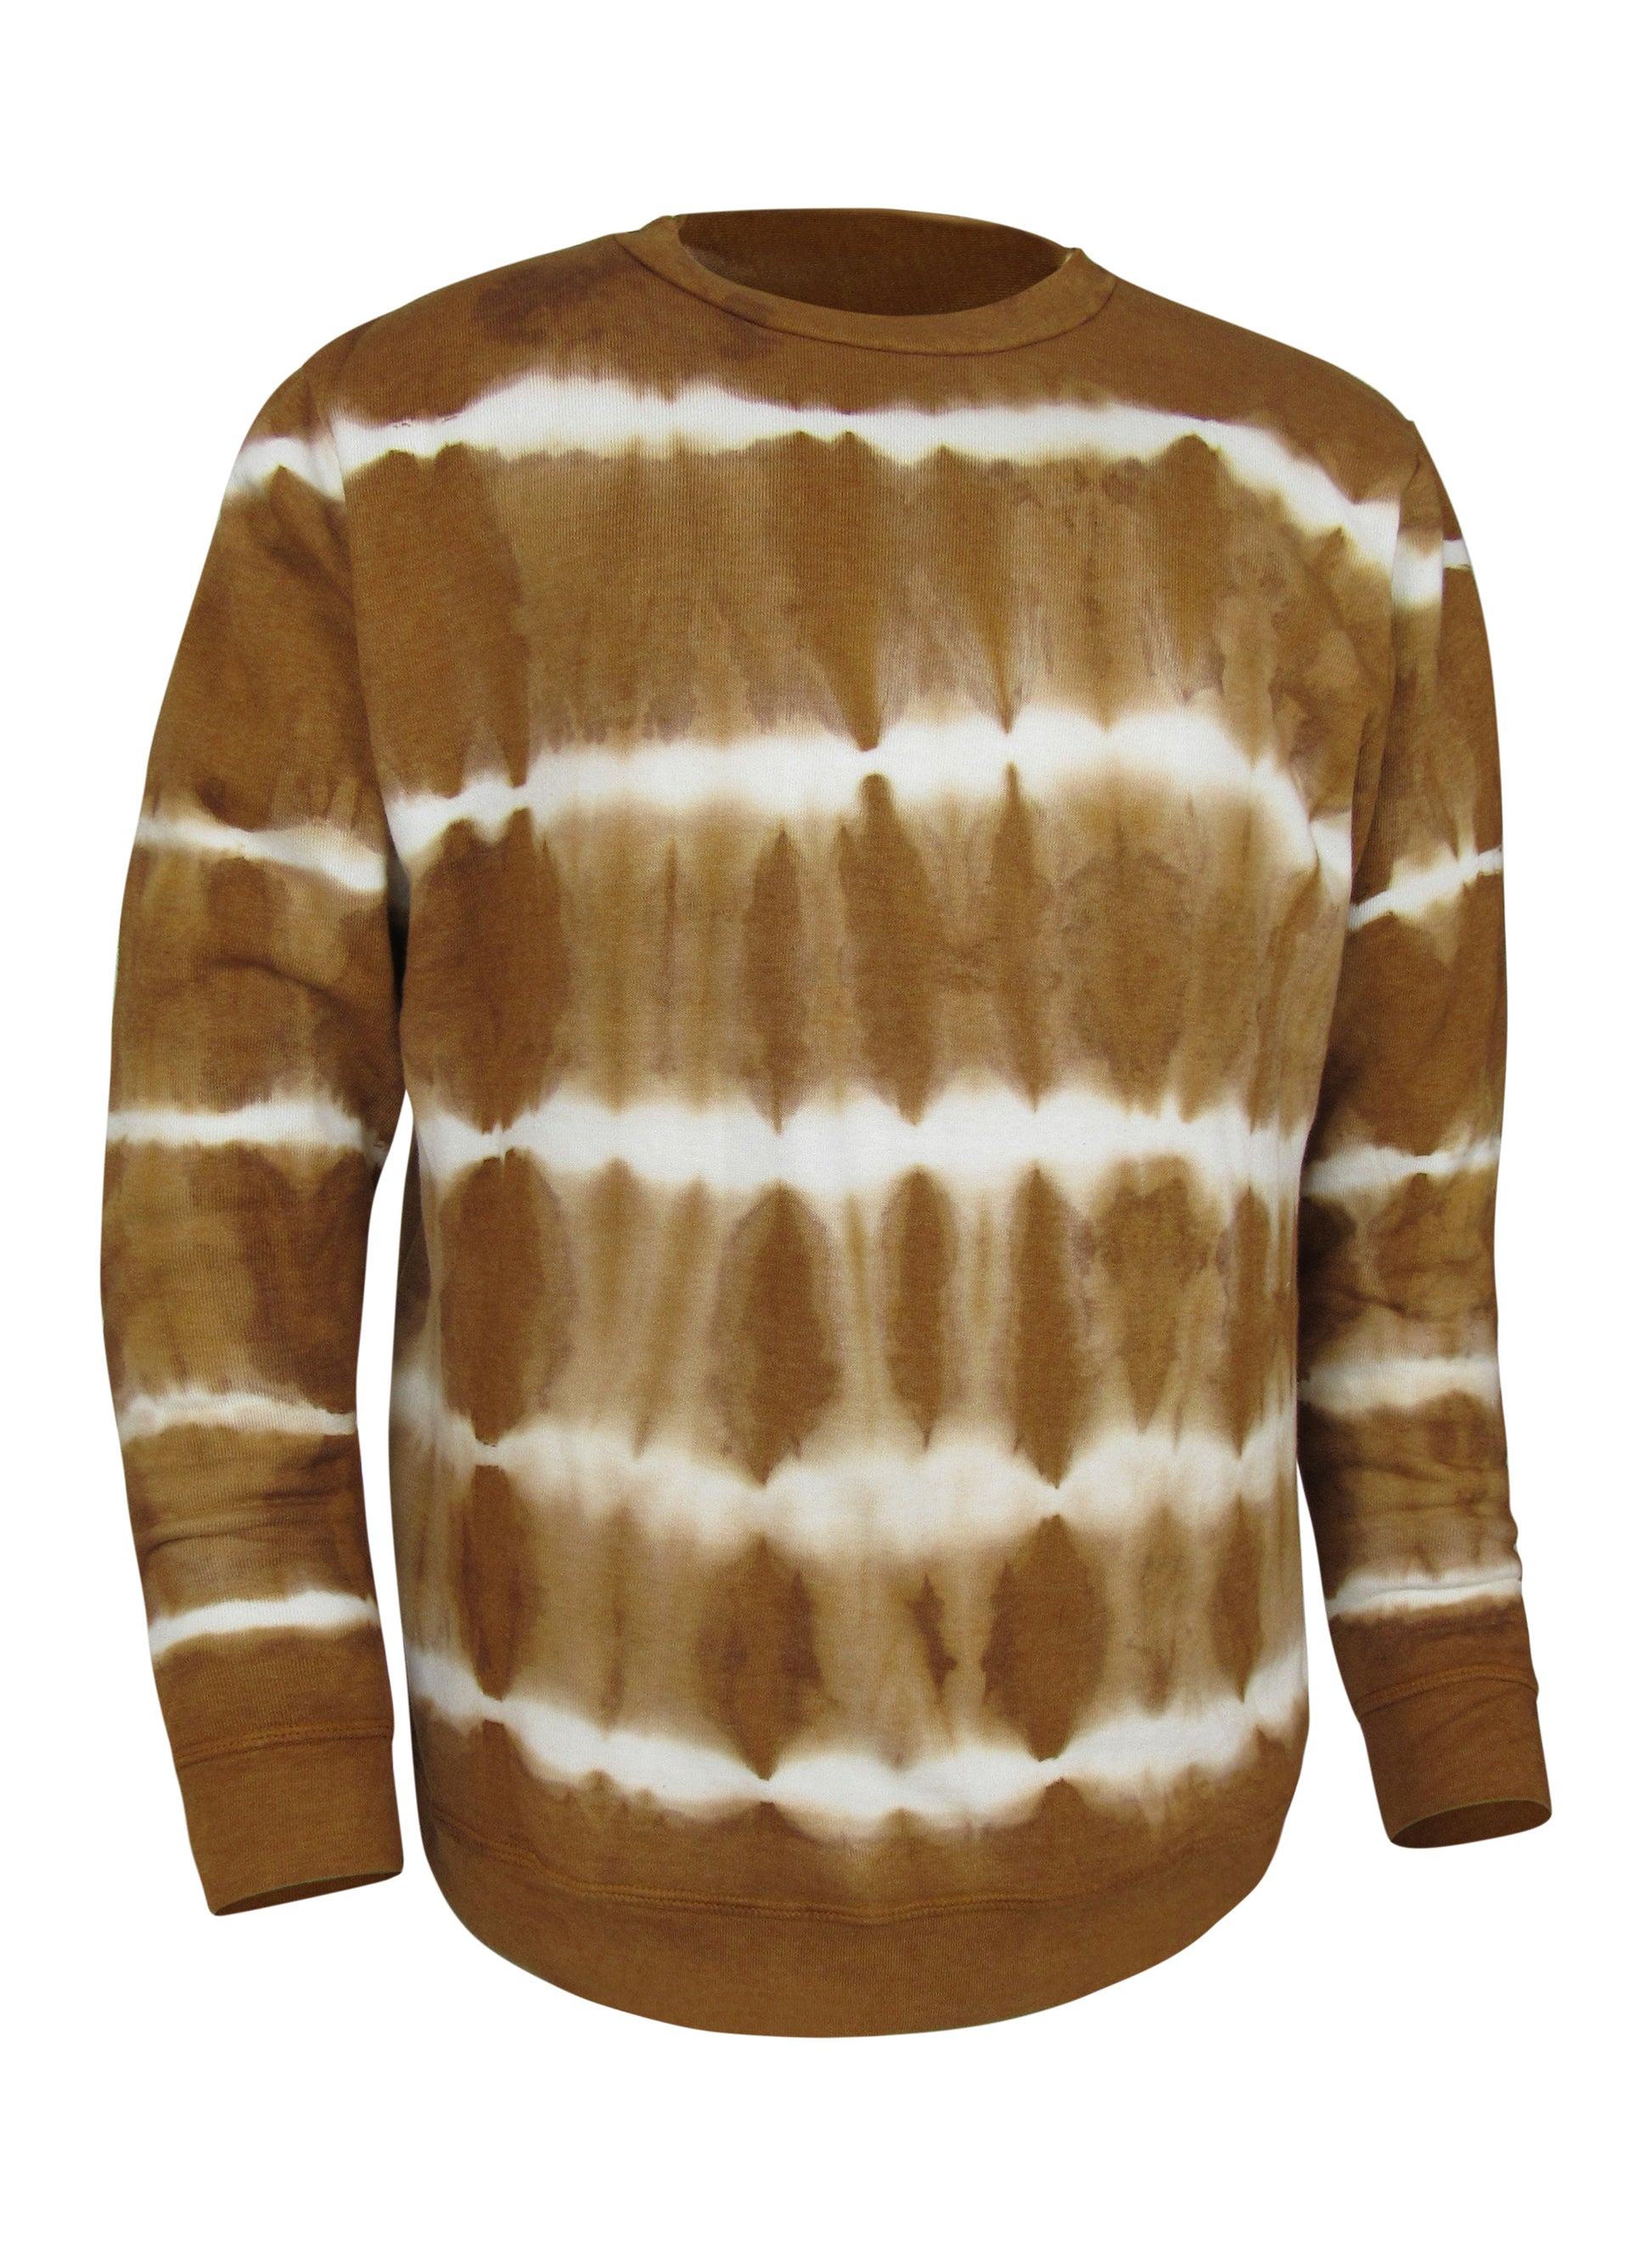 Horizontal Tie Dye Long sleeve crewneck in brown and natural by Old El Paso Shirtworks Made in USA